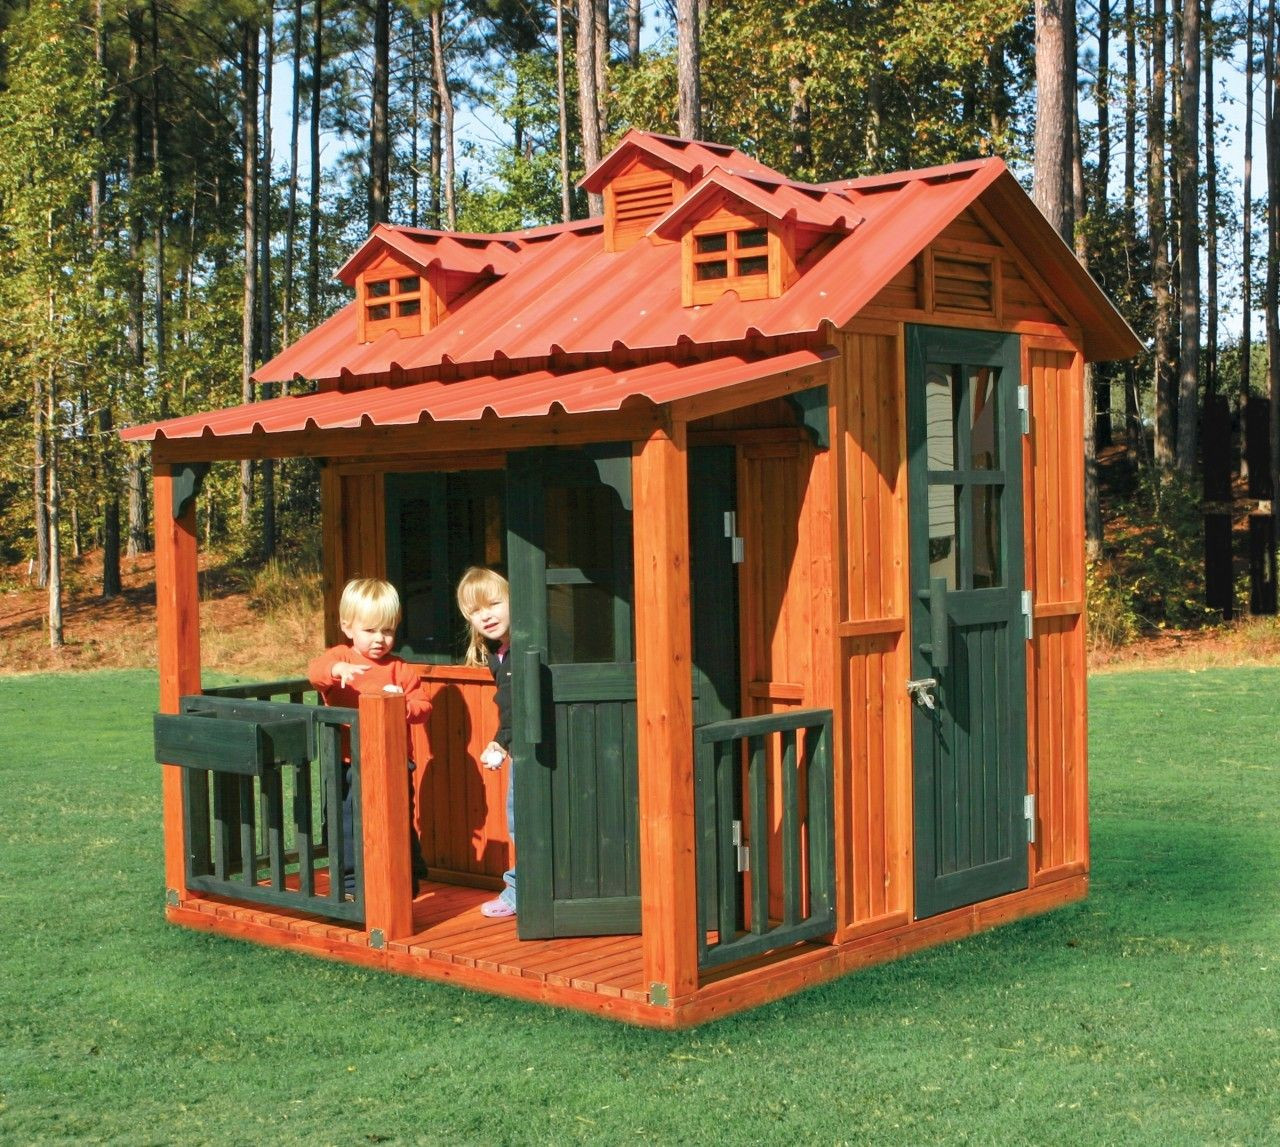 Outdoor Playhouse For Kids
 Playhouse For Kids Outdoor Playhouse For Kids